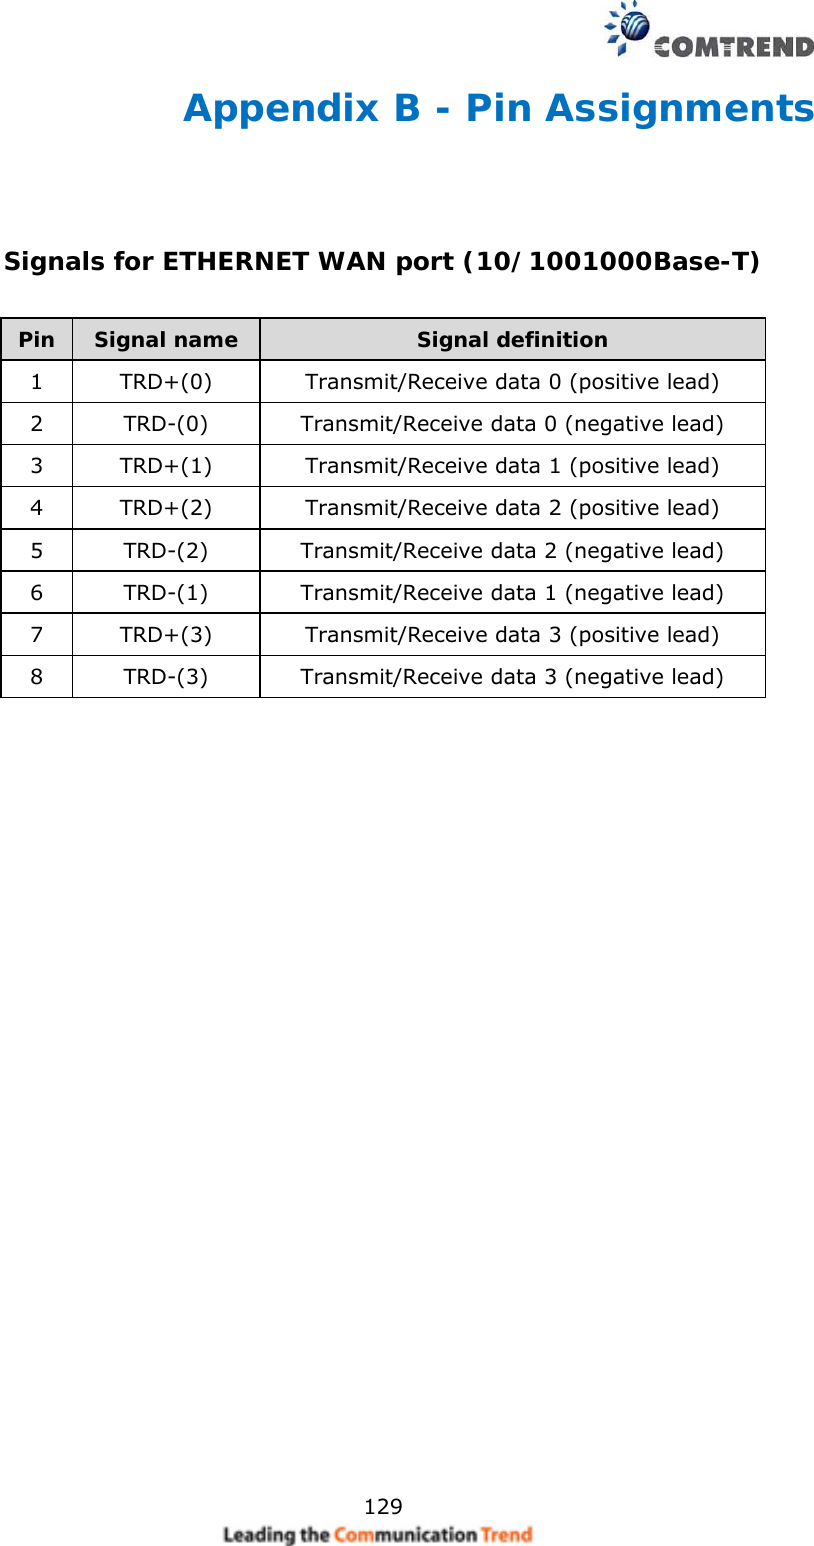    129Appendix B - Pin Assignments   Signals for ETHERNET WAN port (10/1001000Base-T)  Pin Signal name Signal definition 1  TRD+(0)  Transmit/Receive data 0 (positive lead) 2  TRD-(0)  Transmit/Receive data 0 (negative lead) 3  TRD+(1)  Transmit/Receive data 1 (positive lead) 4  TRD+(2)  Transmit/Receive data 2 (positive lead) 5  TRD-(2)  Transmit/Receive data 2 (negative lead) 6  TRD-(1)  Transmit/Receive data 1 (negative lead) 7  TRD+(3)  Transmit/Receive data 3 (positive lead) 8  TRD-(3)  Transmit/Receive data 3 (negative lead)  